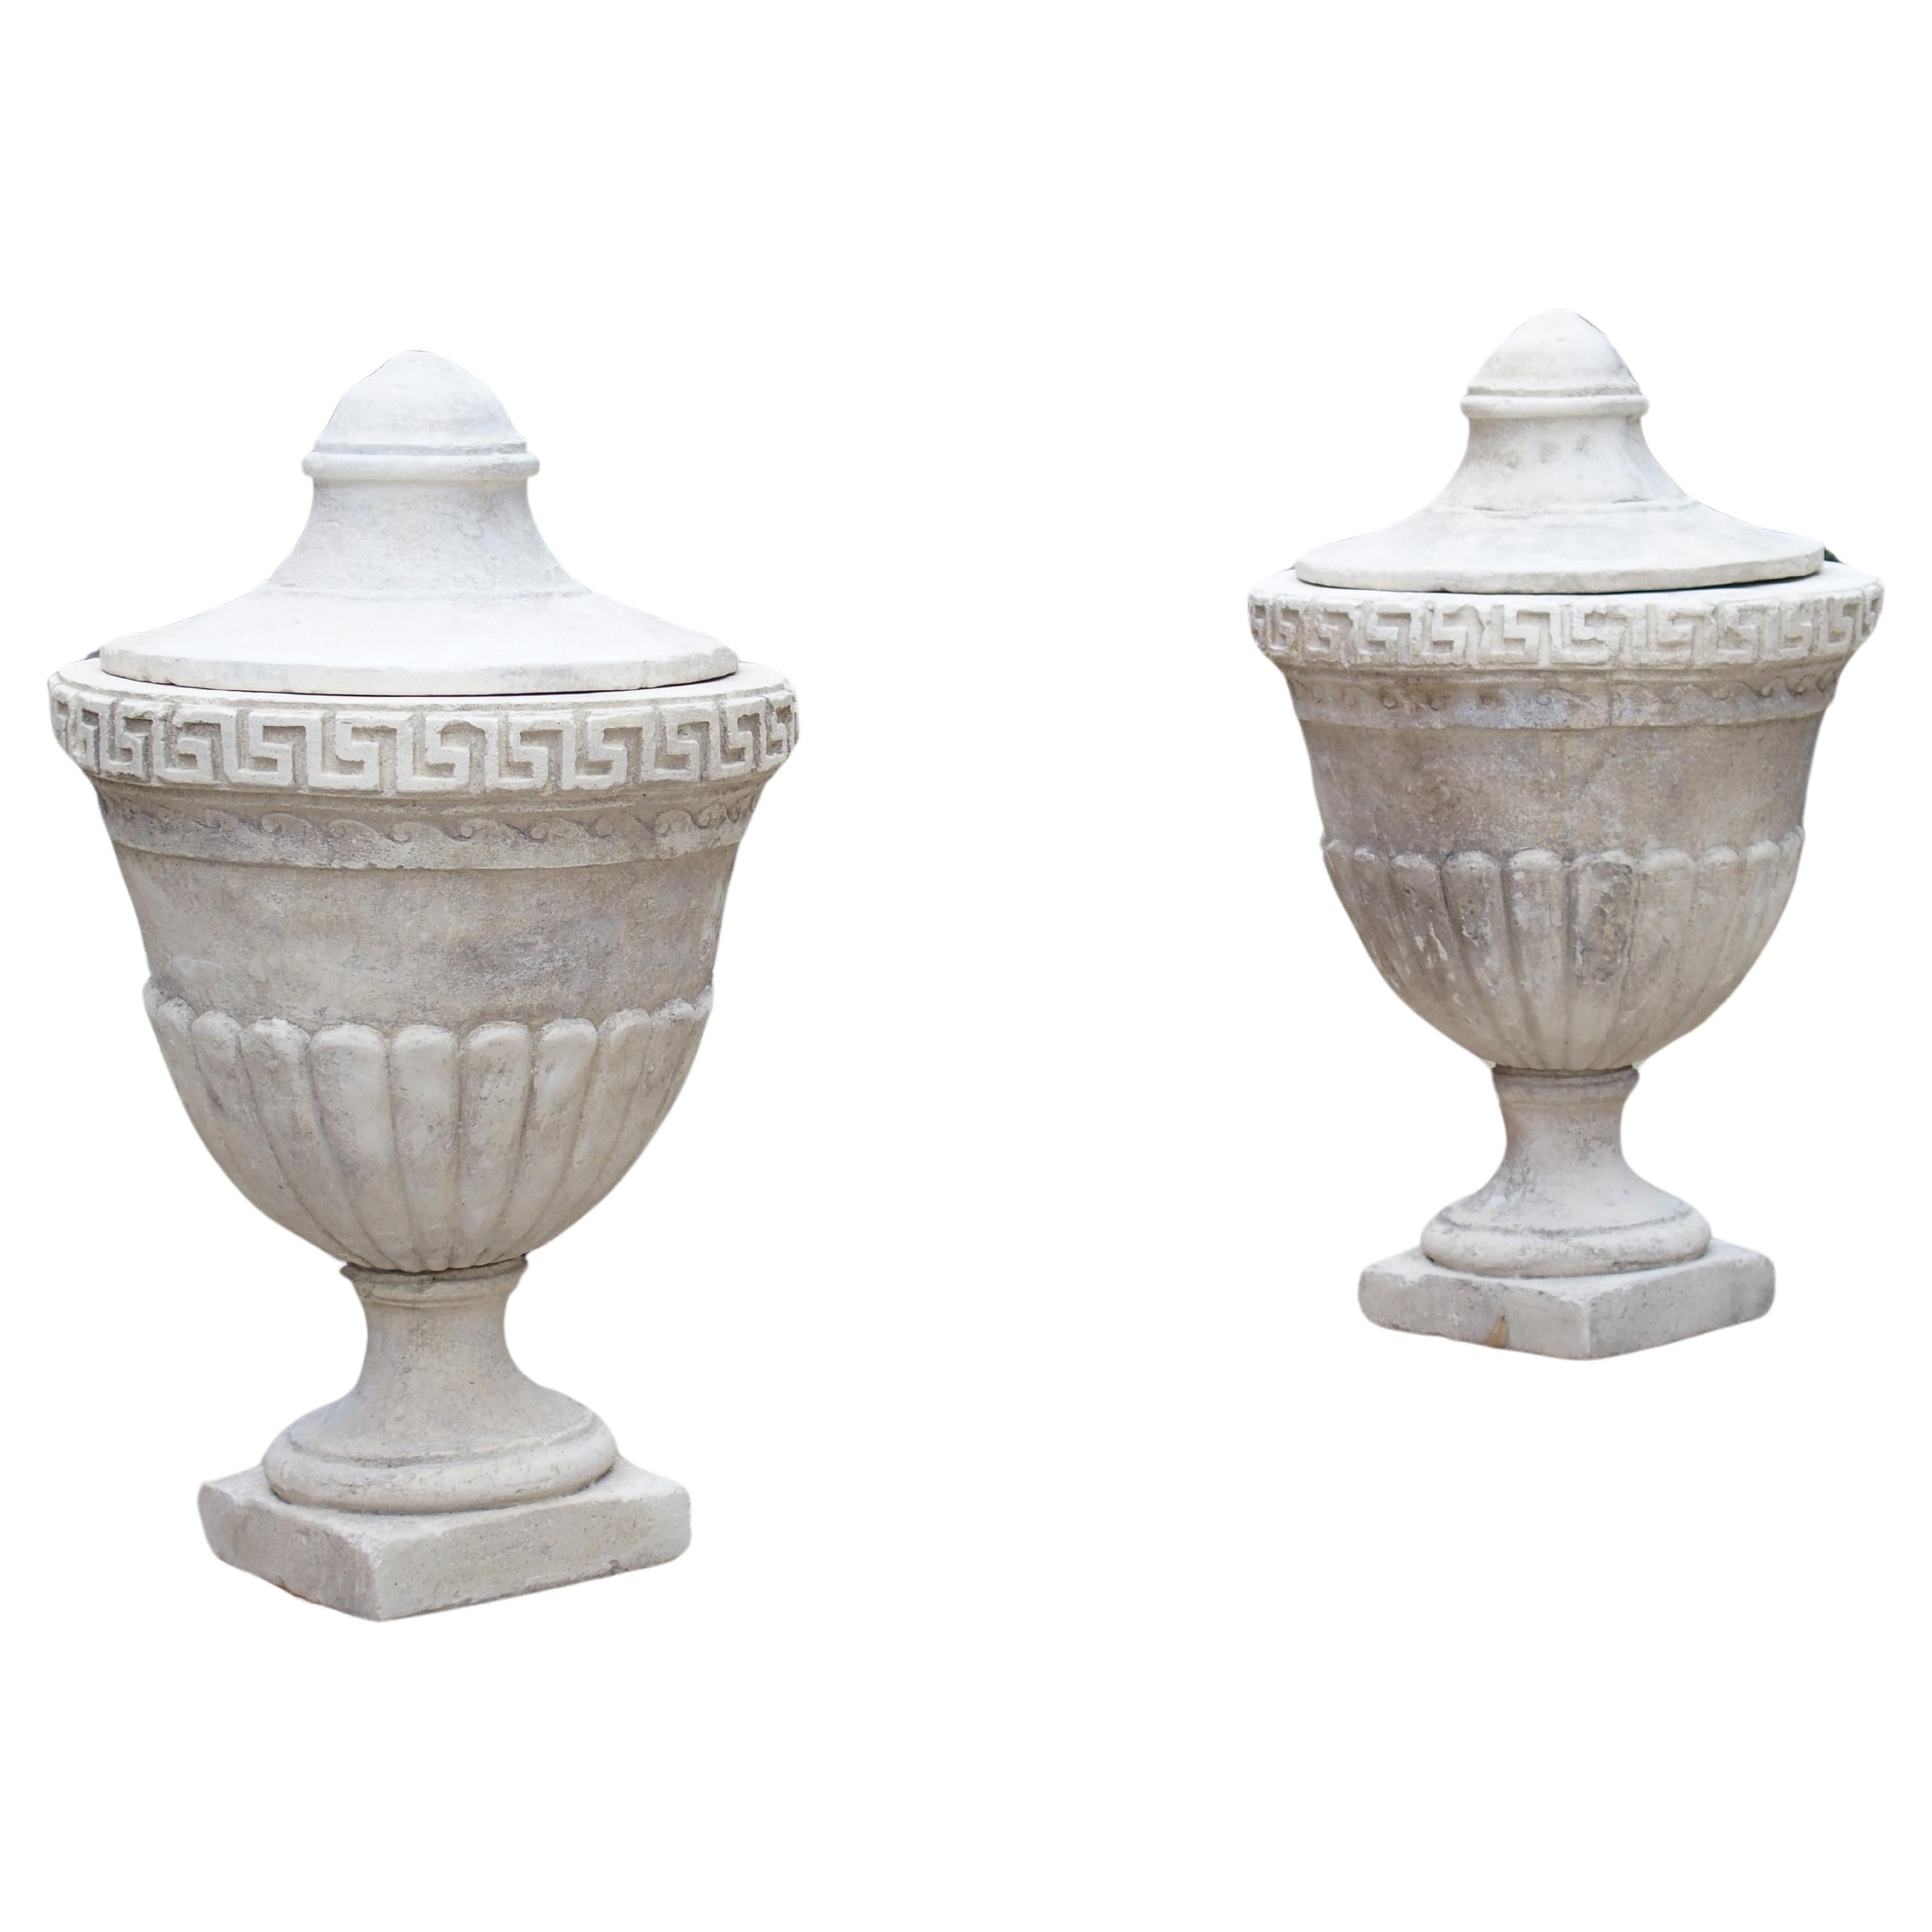 Pair of Lidded Cast Limestone Greek Key Urns from Southern Italy